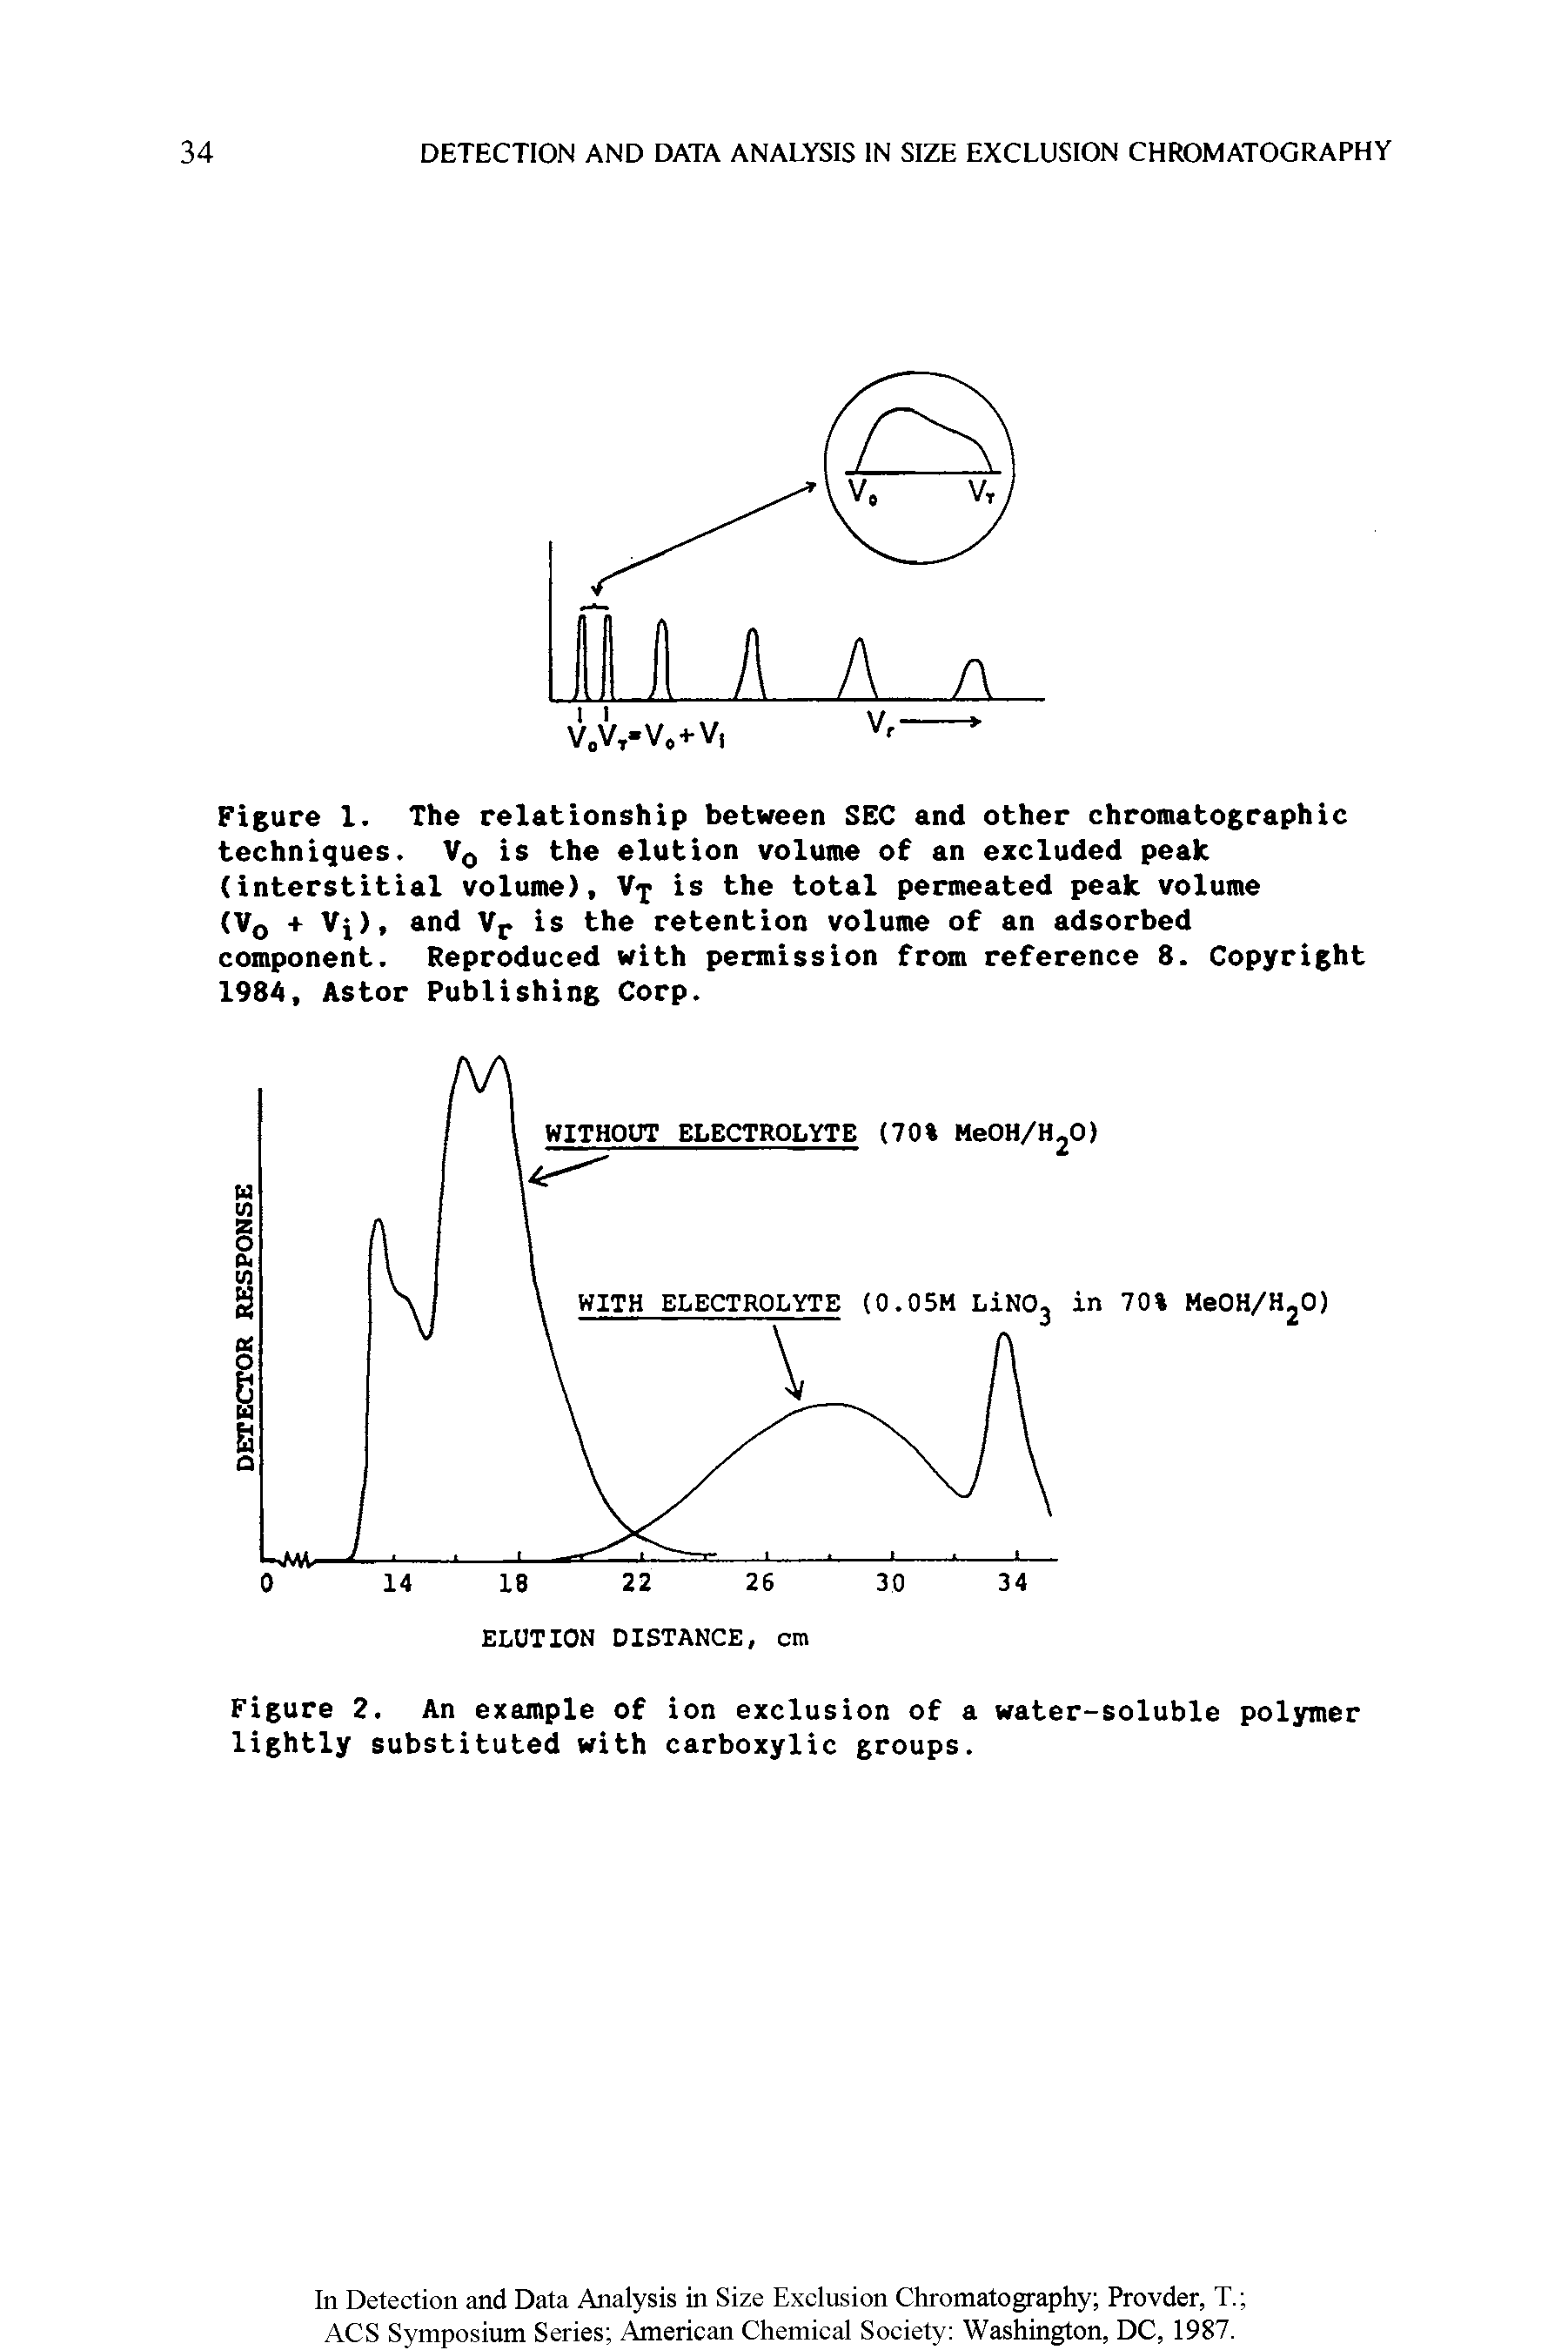 Figure 1. The relationship between SEC and other chromatographic techniques. V(, is the elution volume of an excluded peak (interstitial volume), Vj is the total permeated peak volume (Vo + Vj), and Vj. is the retention volume of an adsorbed component. Reproduced with permission from reference 8. Copyright 1984, Astor Publishing Corp.